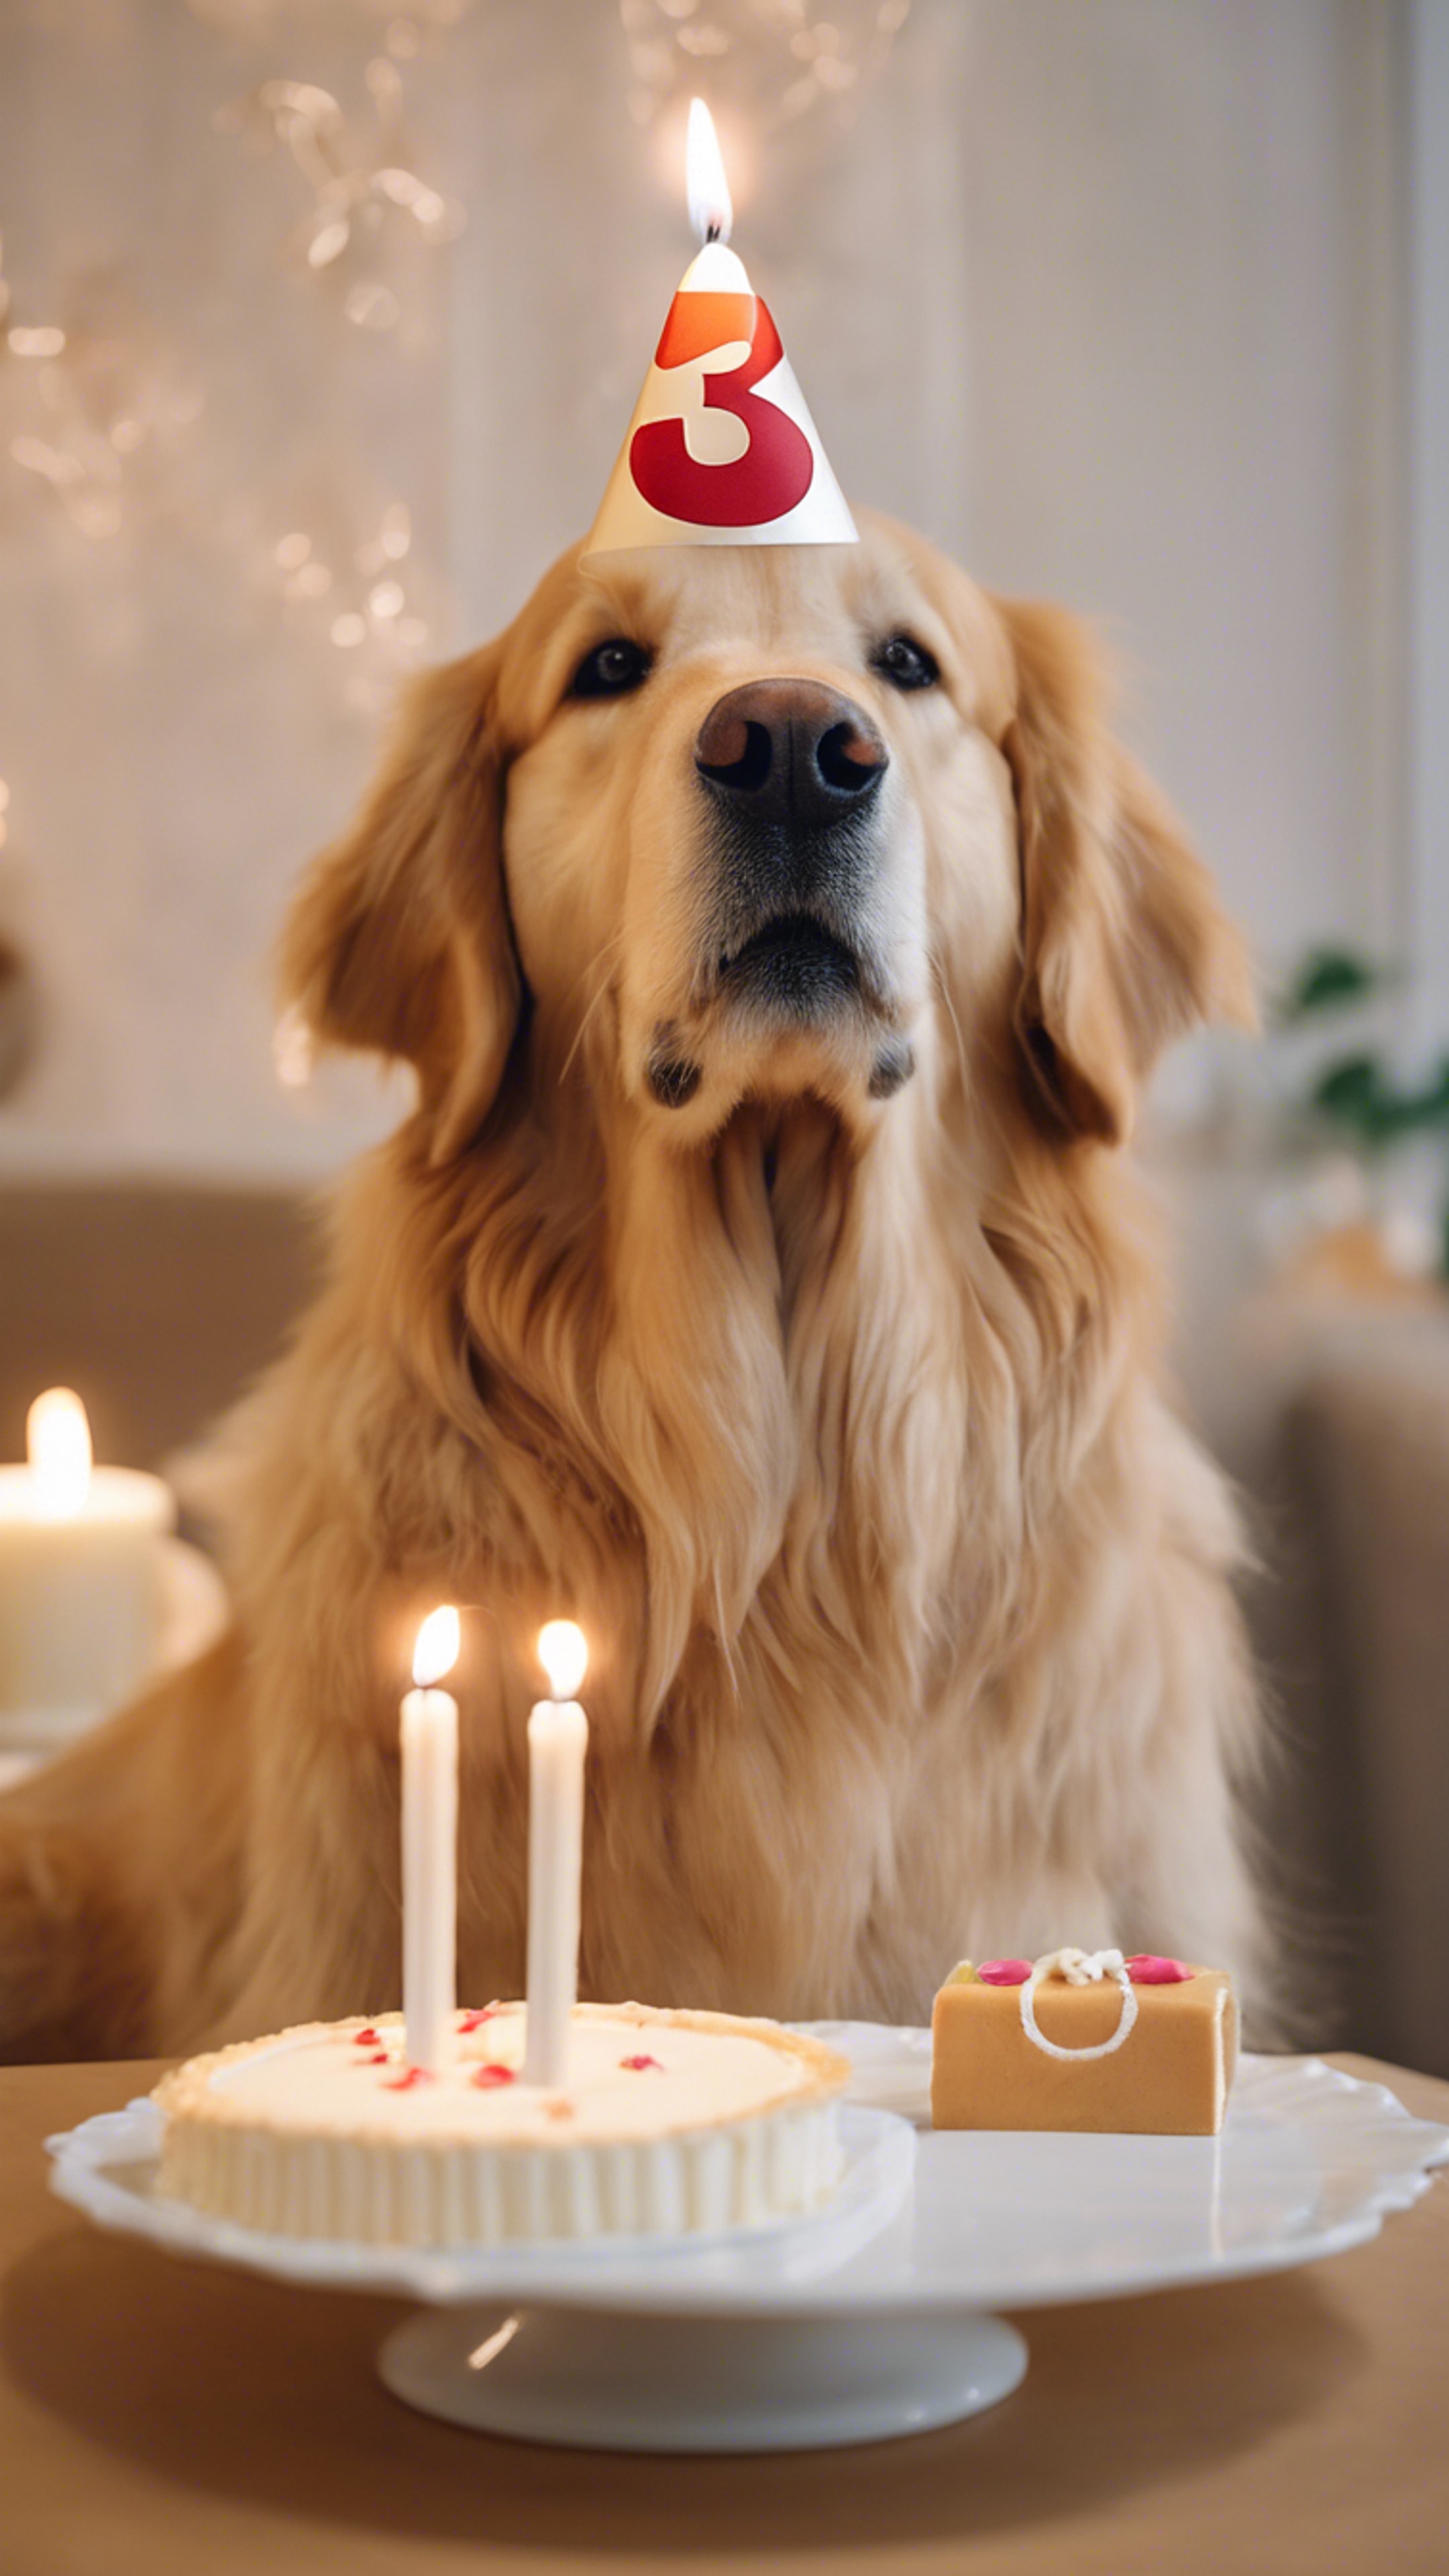 A golden retriever wearing a birthday hat, sitting in front of a numbered '3' candle on a small cake, looking eagerly at the camera. Fondo de pantalla[271fe240b95e4af1b864]